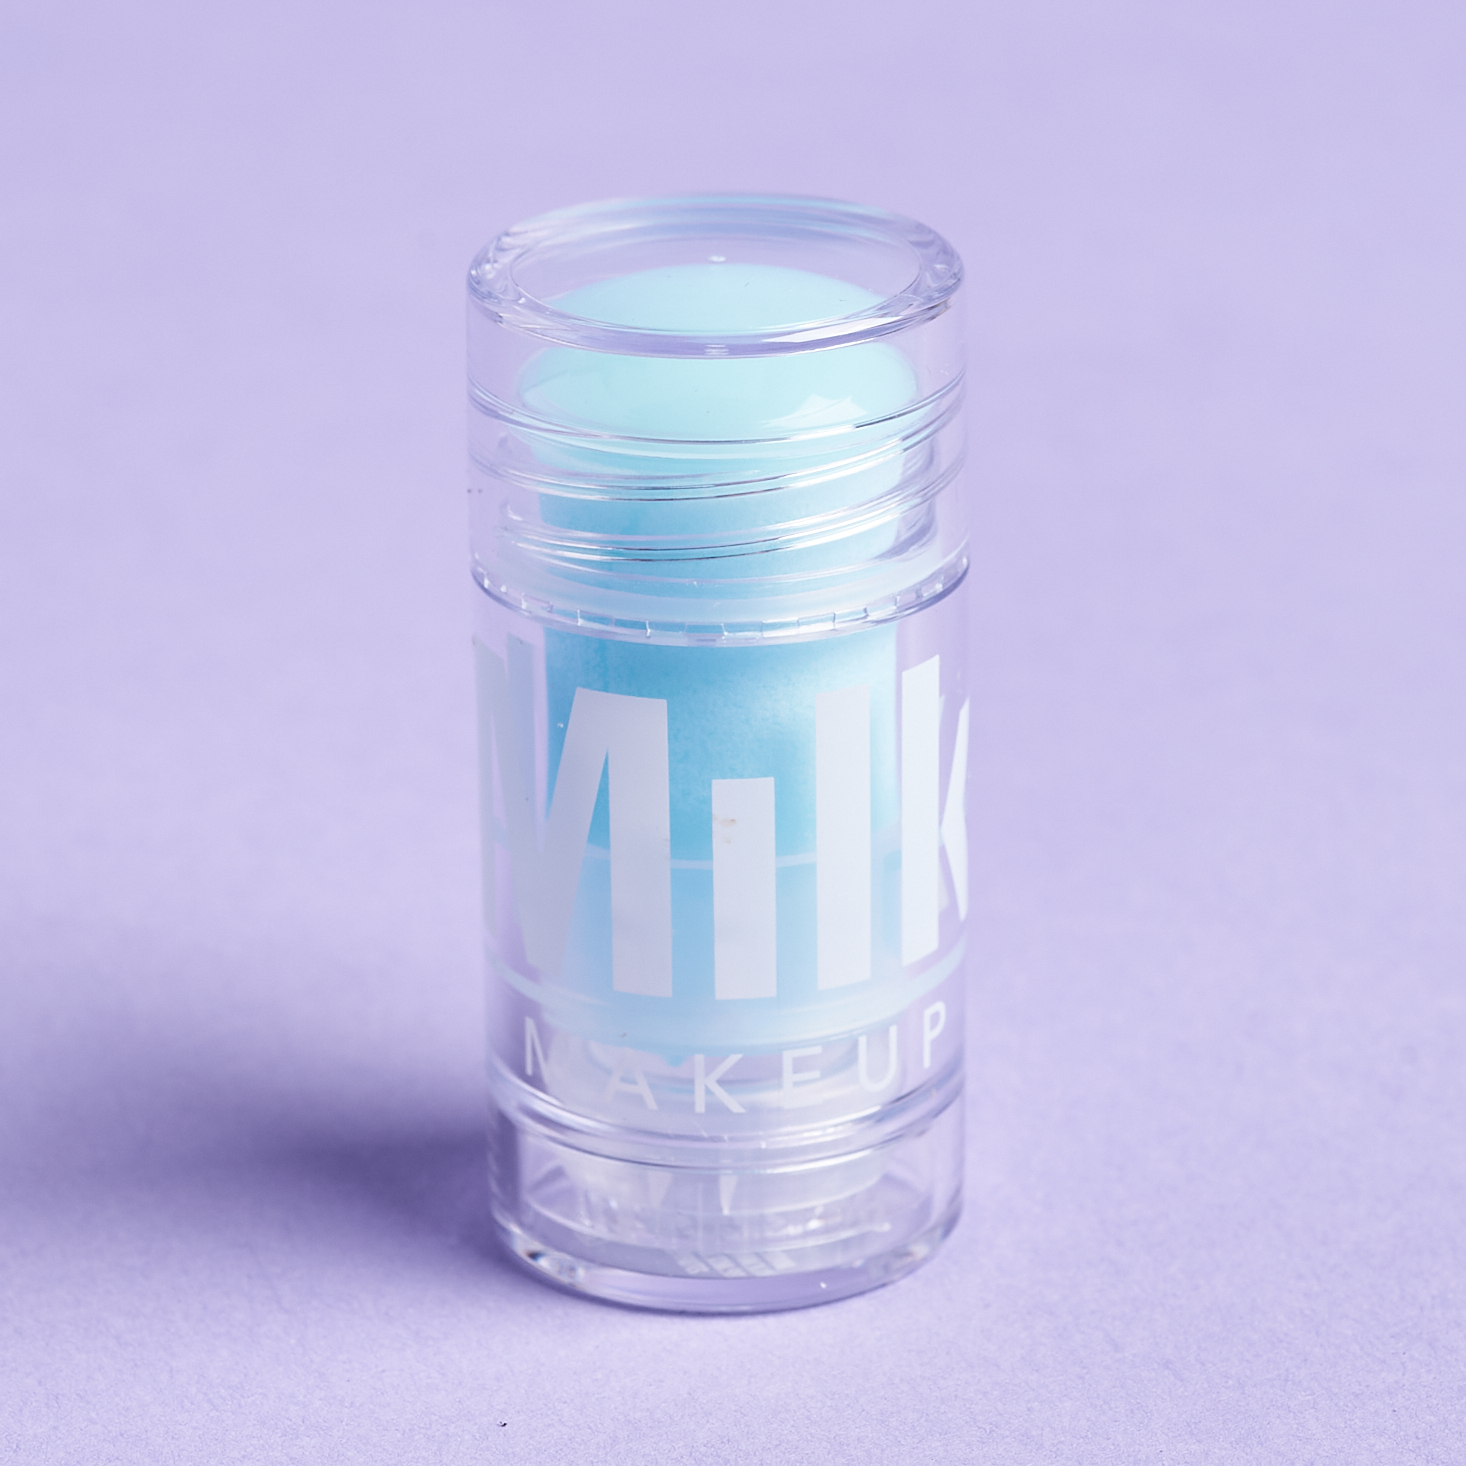 My Review of Milk Makeup's Cooling Water Stick